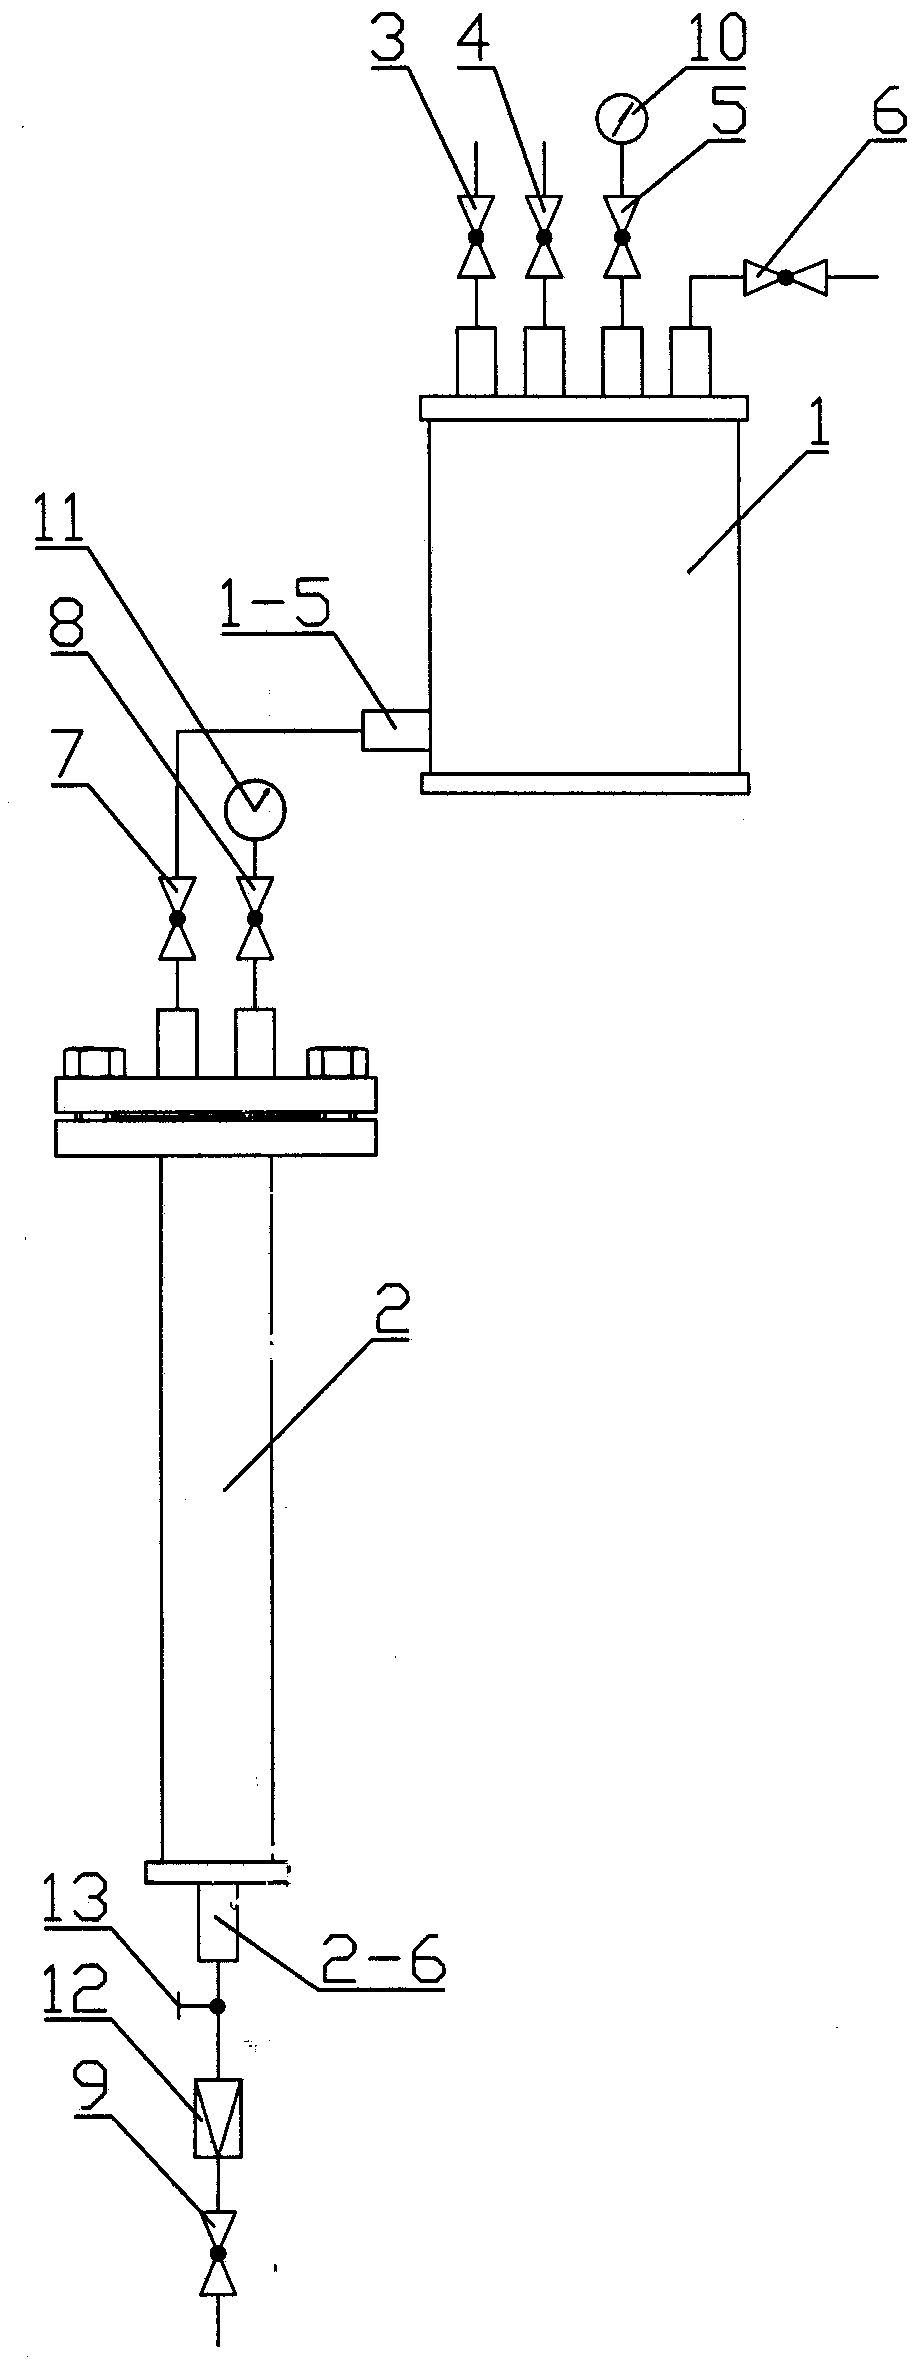 Test device and test method for pressurized column leaching of uranium ore by CO2+O2